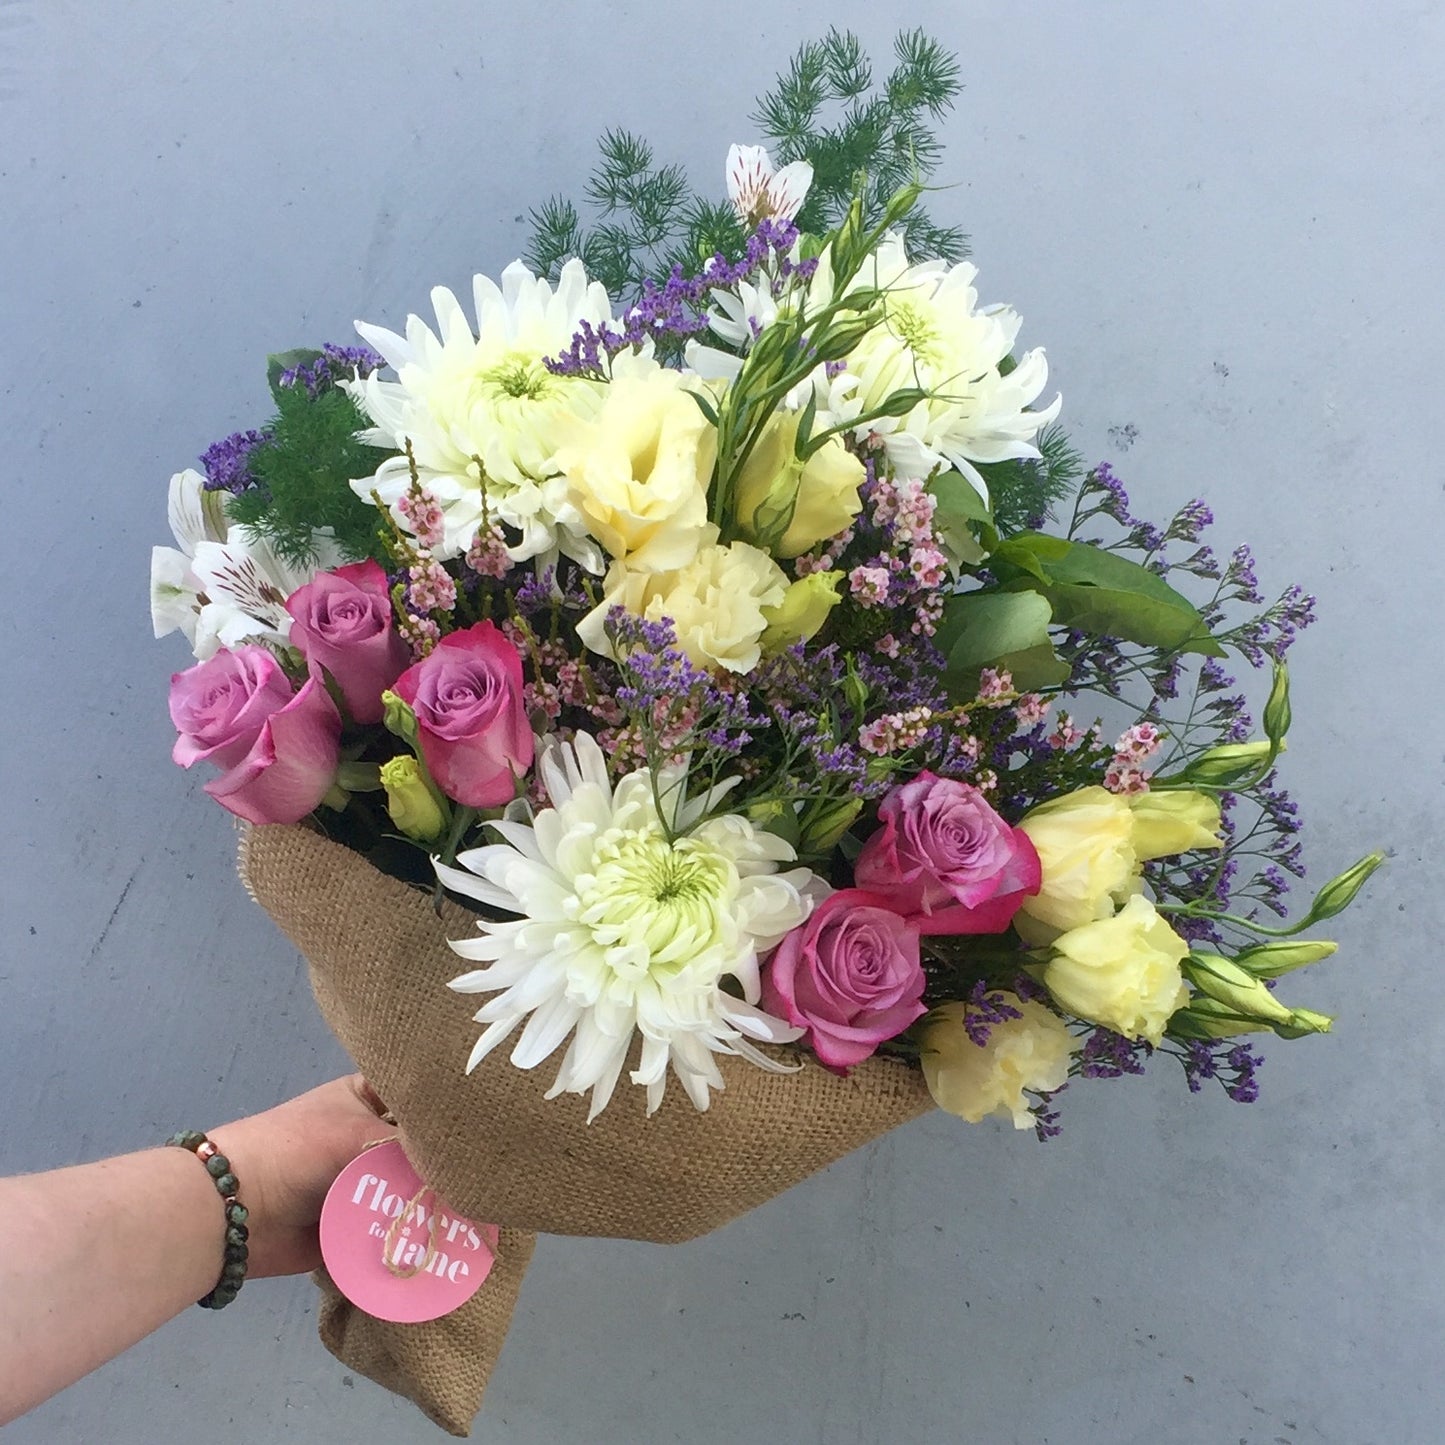 Looking for a Florist near you? Flowers for Jane can deliver!